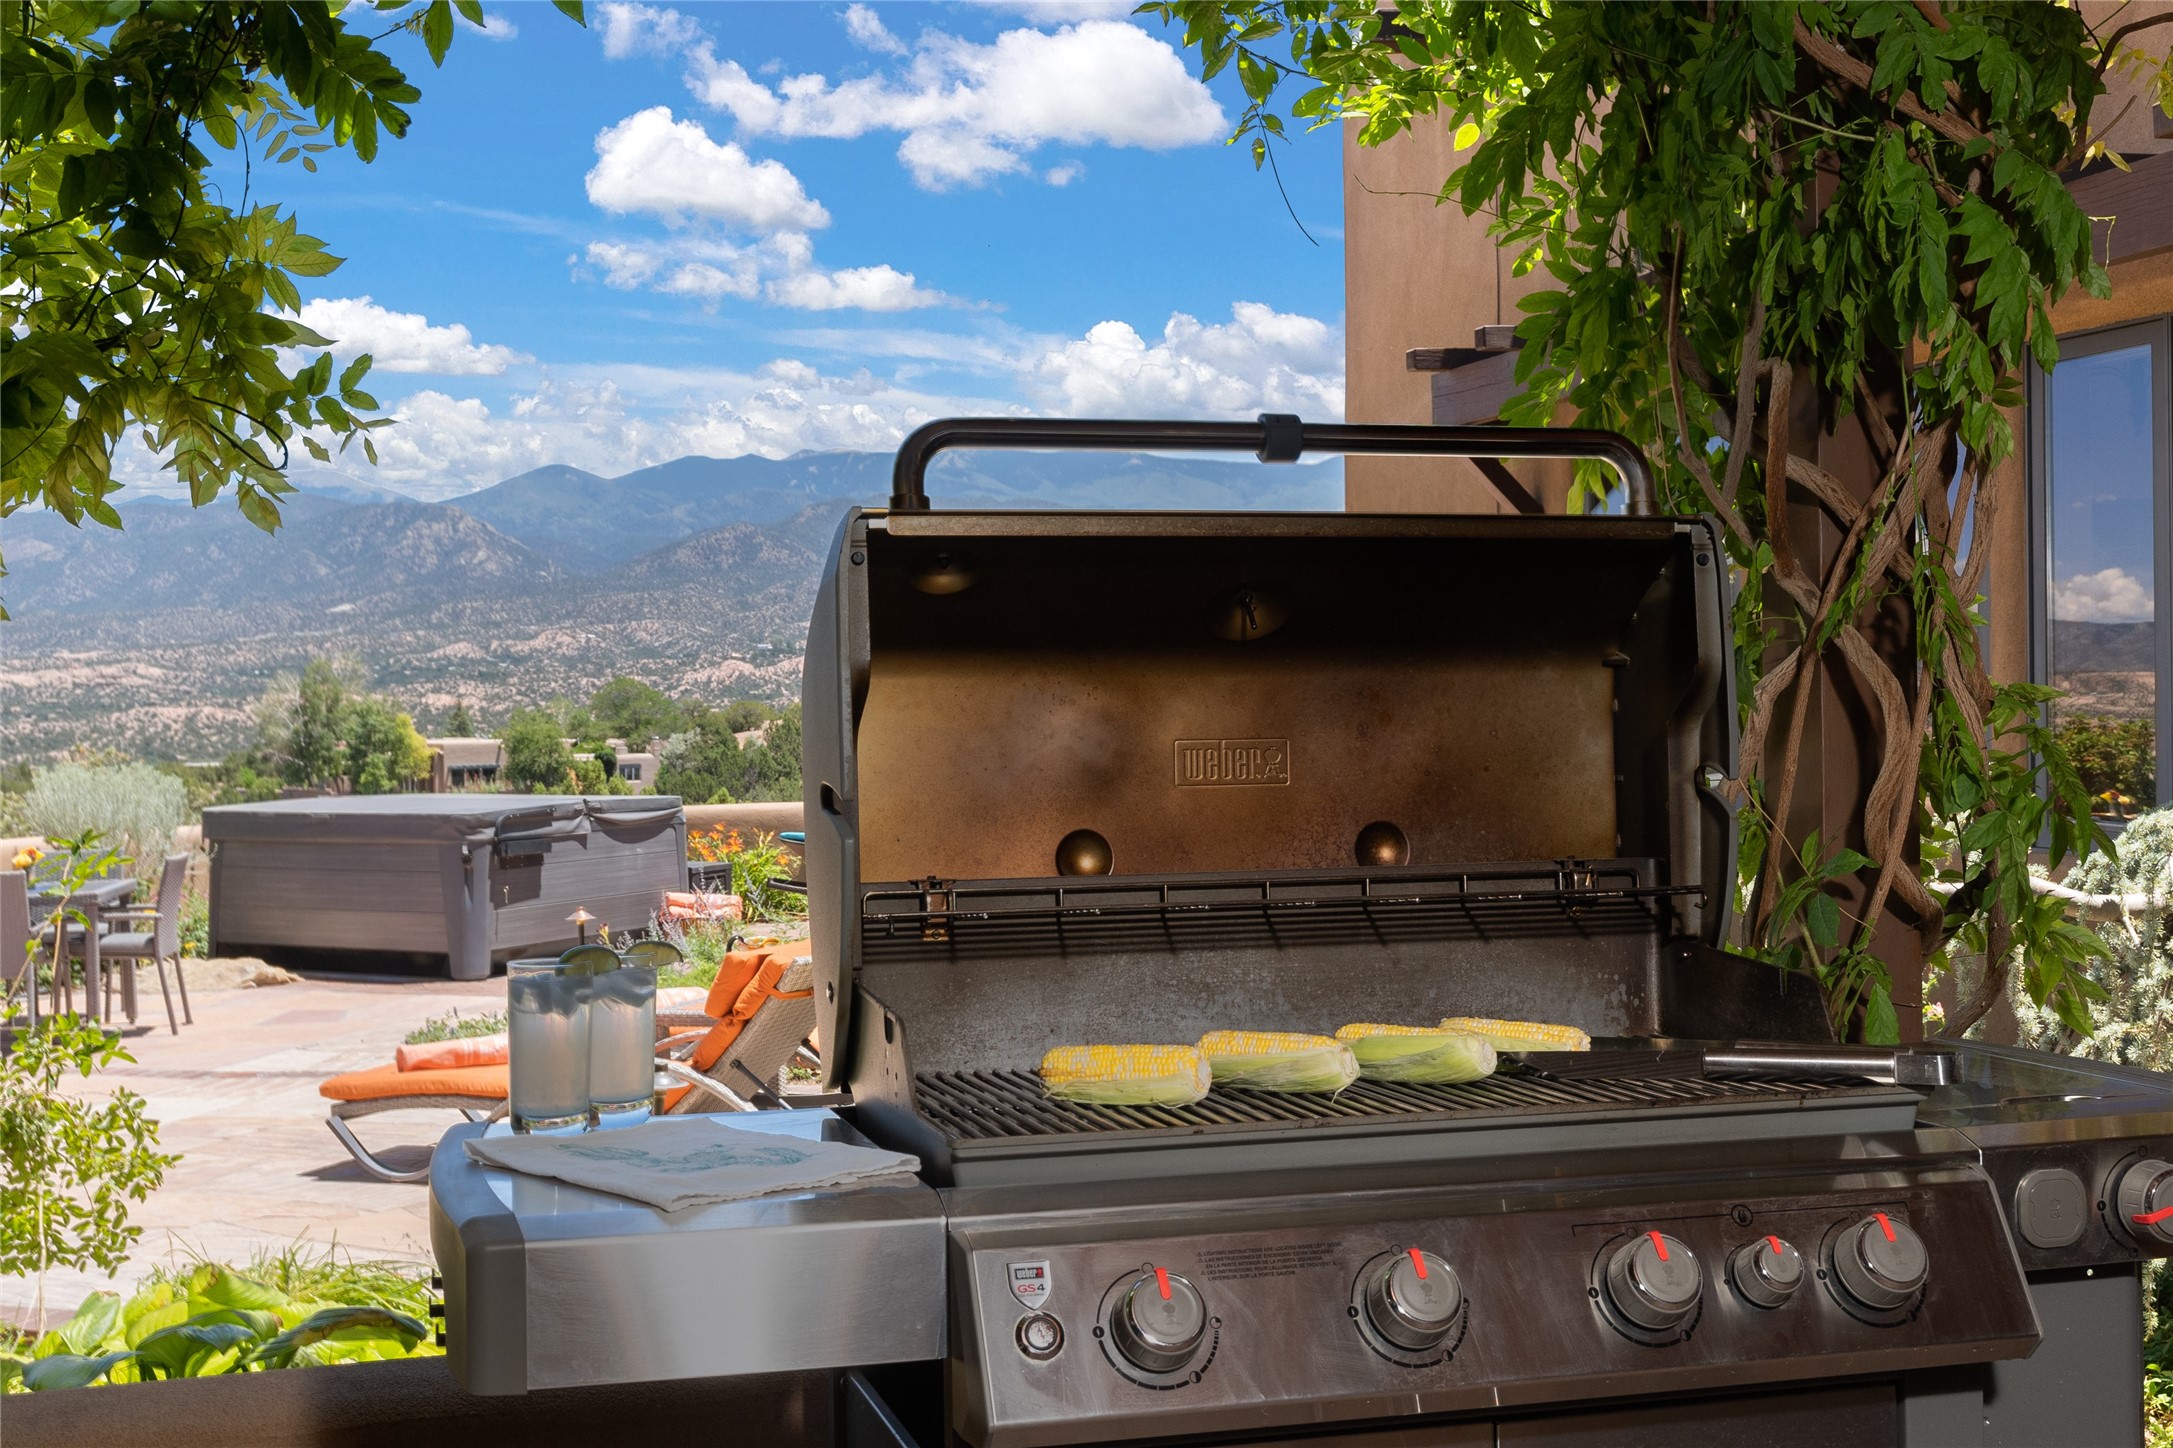 Grill up your favorite foods as you take in the views.